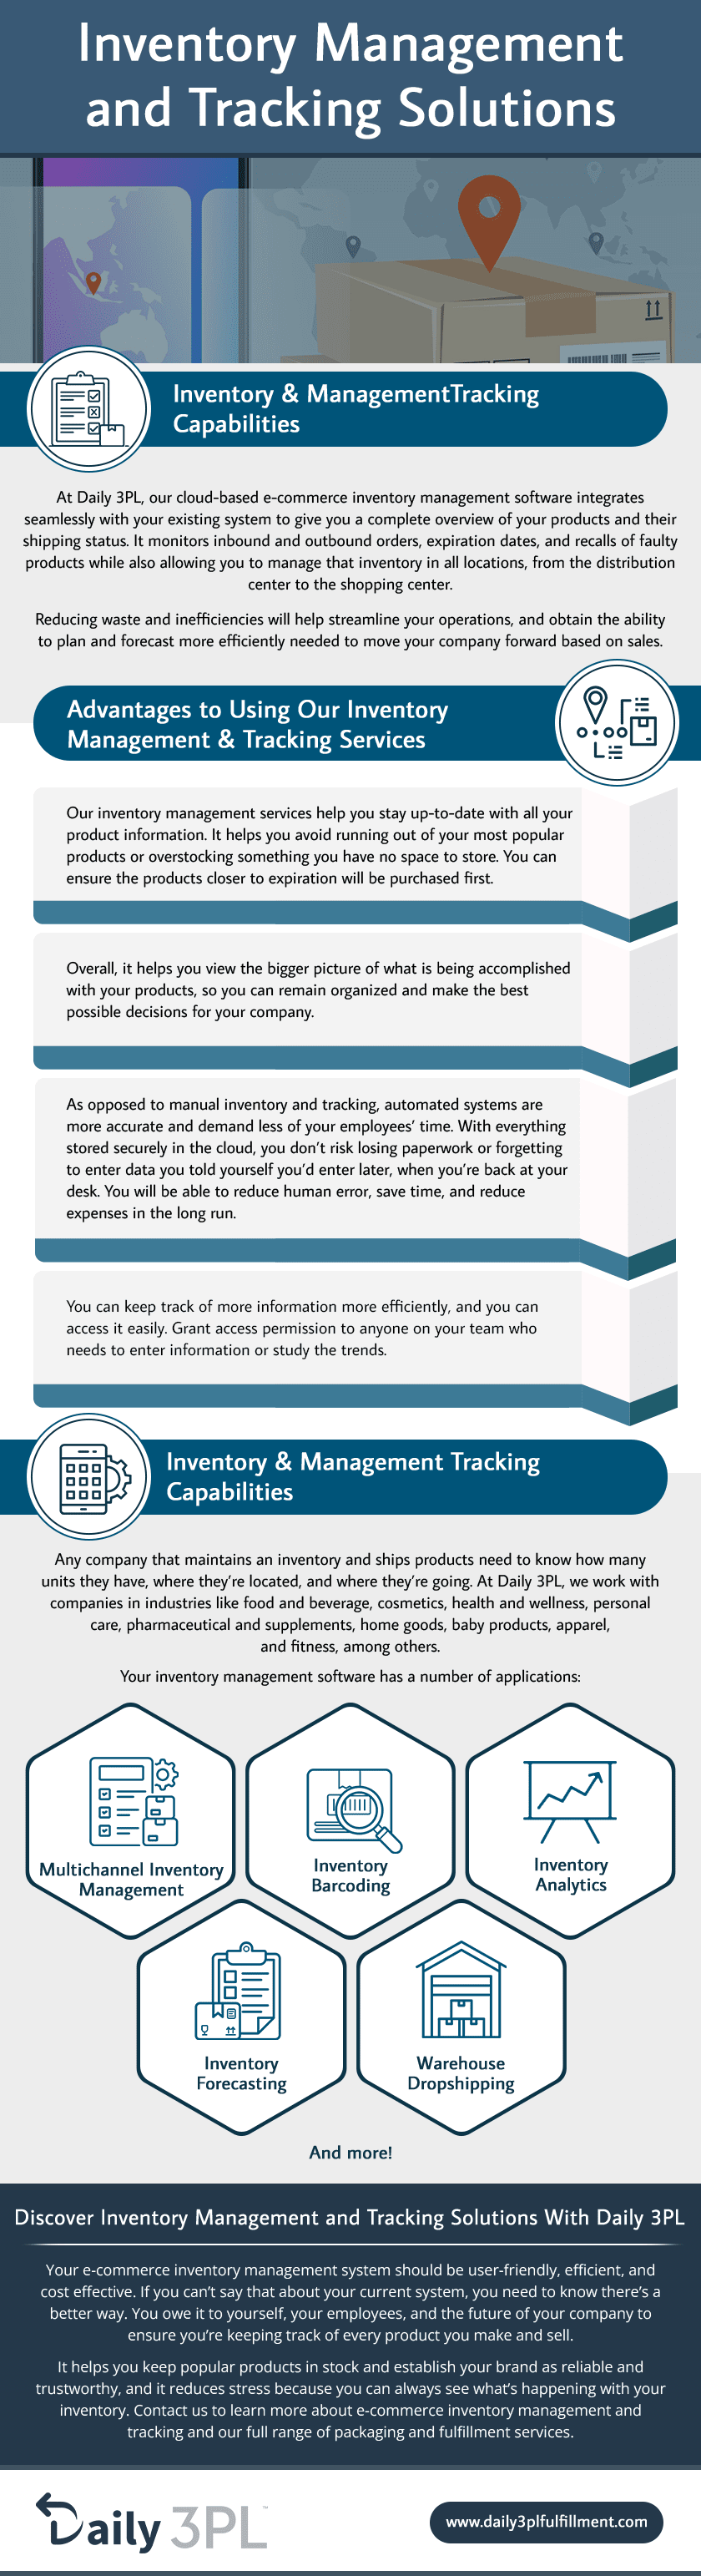 Inventory Management and Tracking Solutions